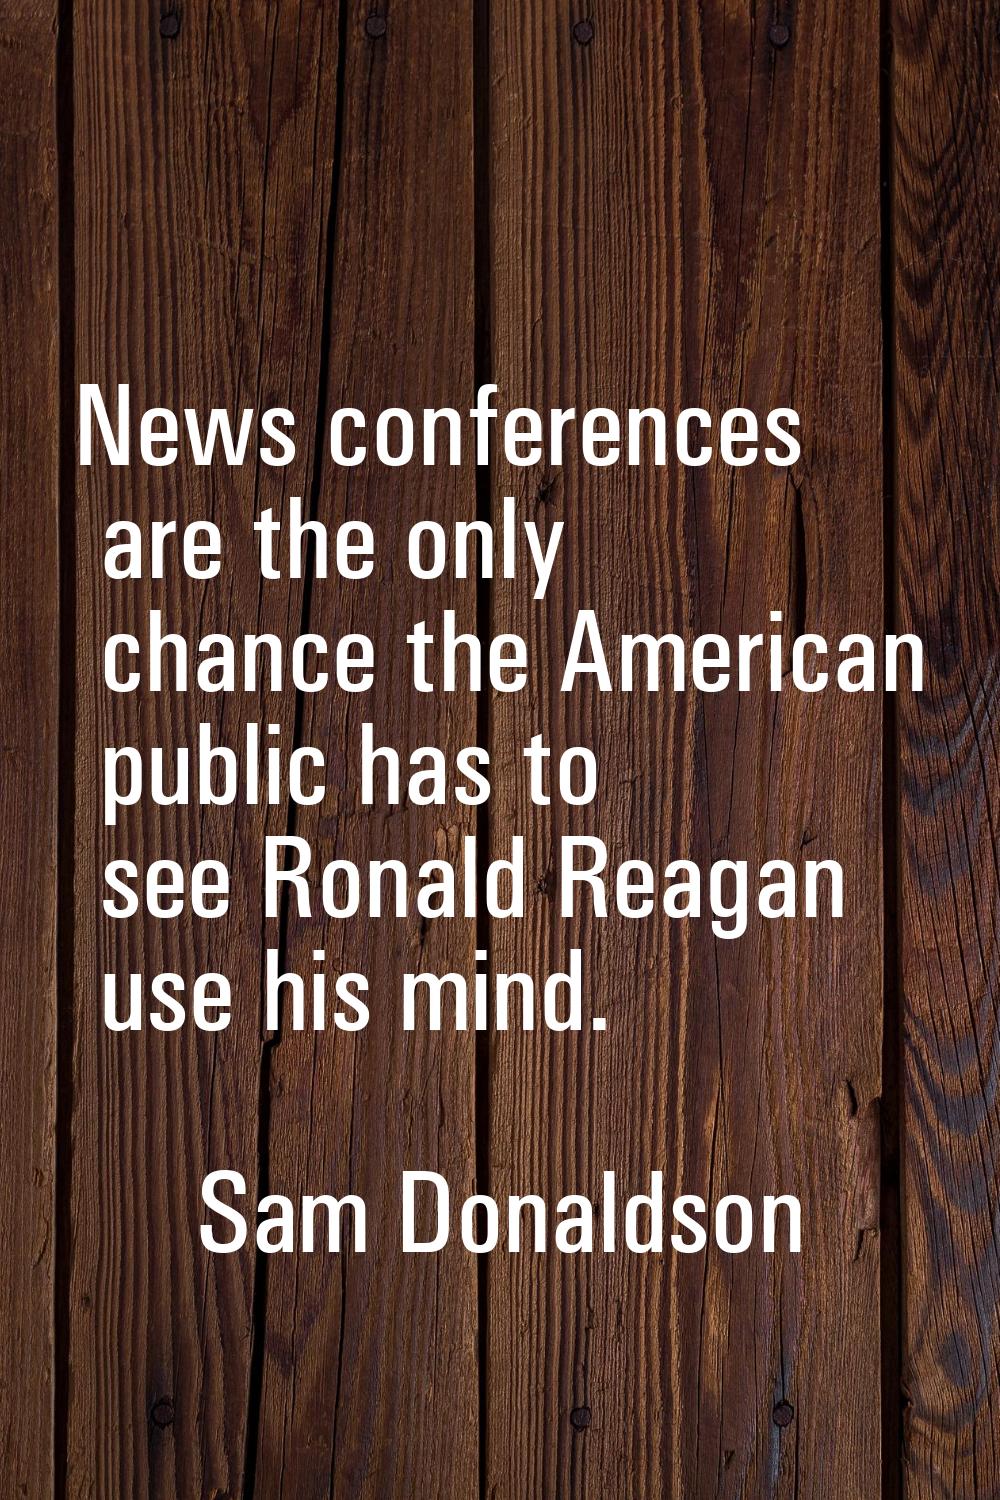 News conferences are the only chance the American public has to see Ronald Reagan use his mind.